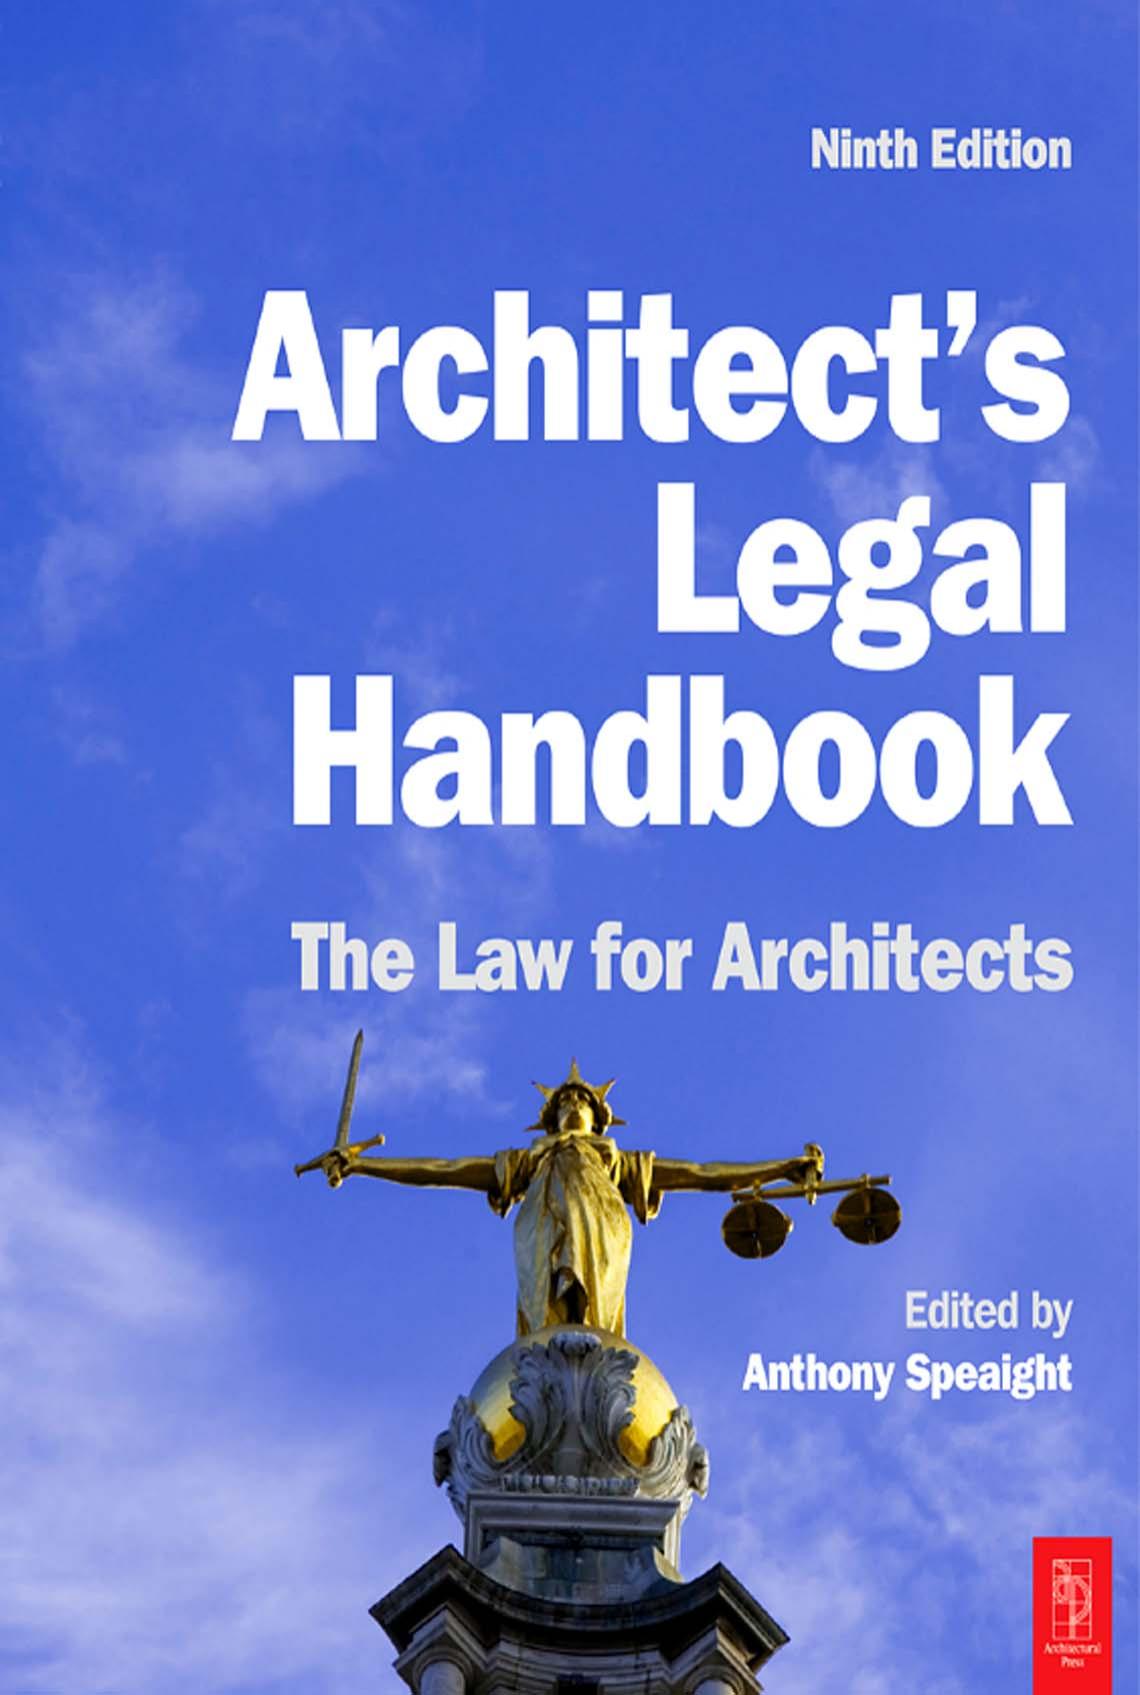 Architect's Legal Handbook, Ninth Edition: The Law for Architects